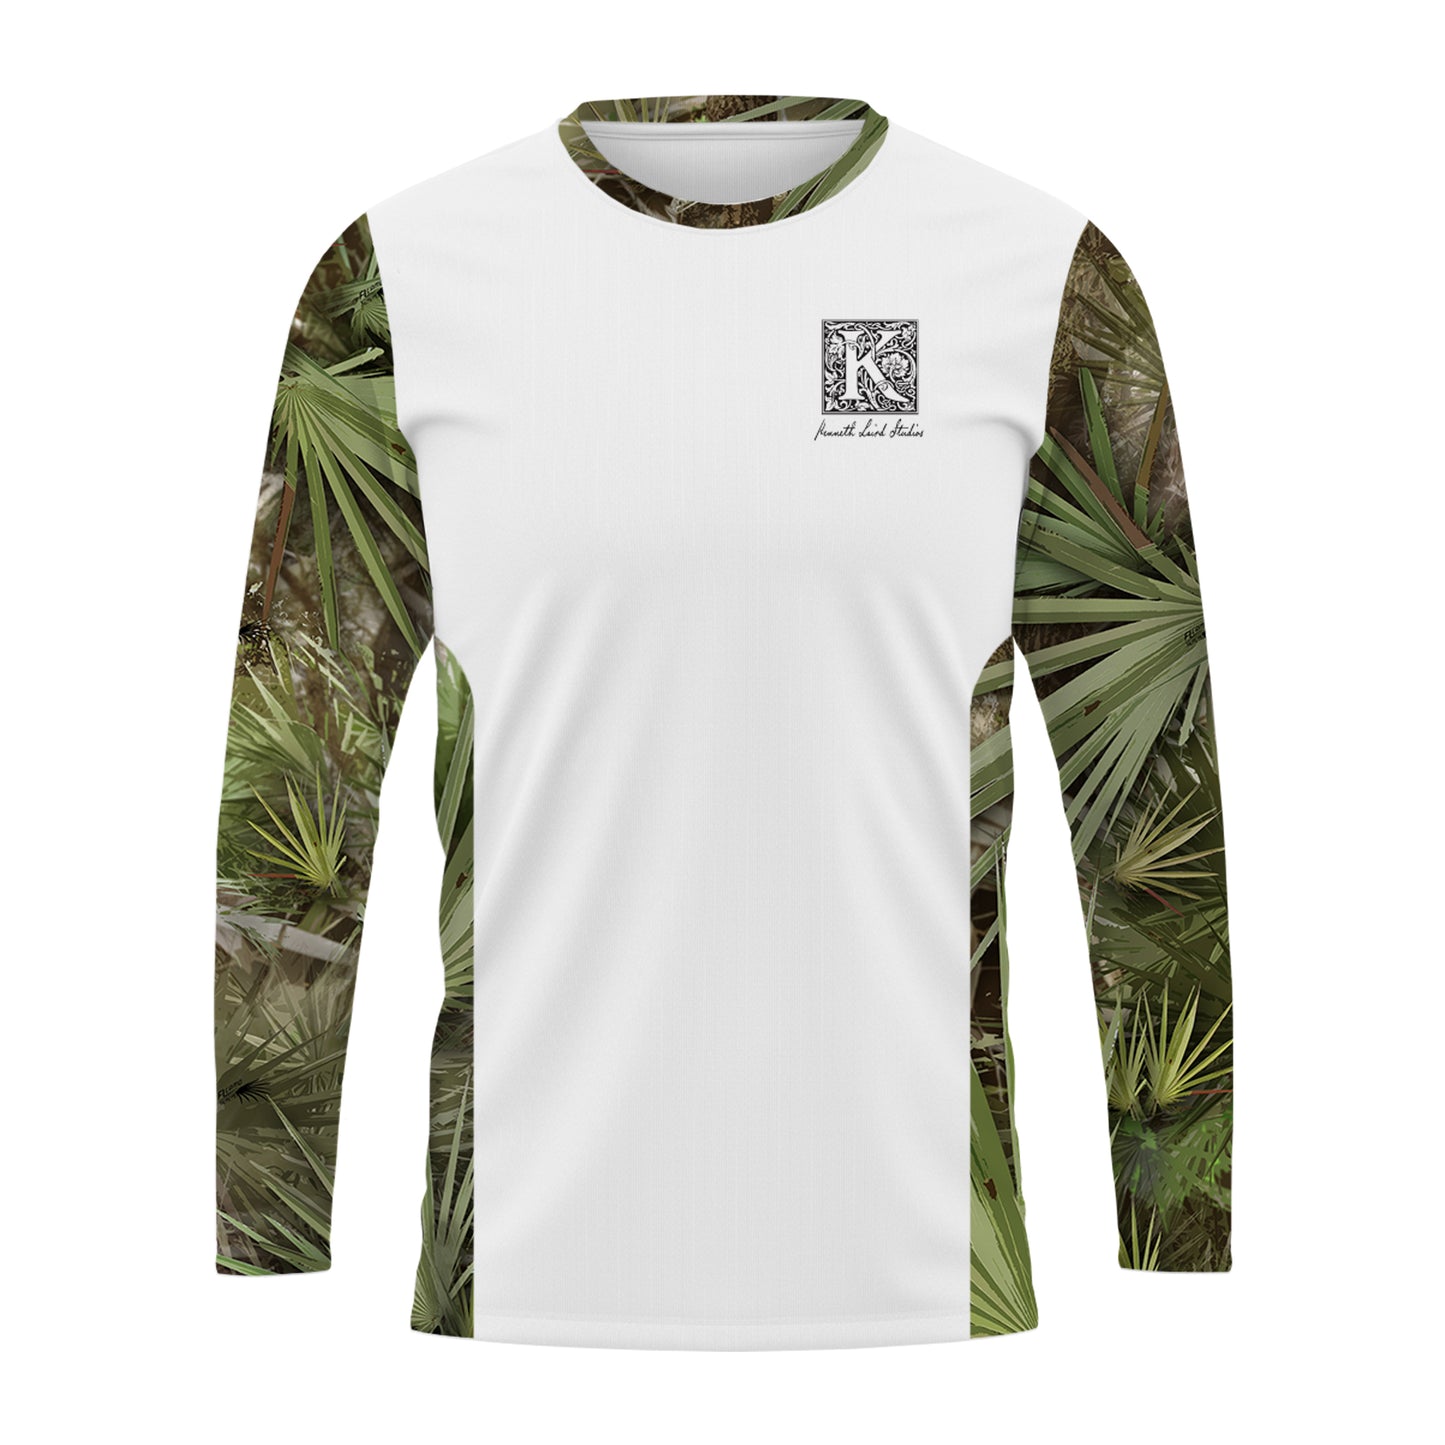 Men's Performance "The Youngster" Fl Camo Palmetto Long Sleeve